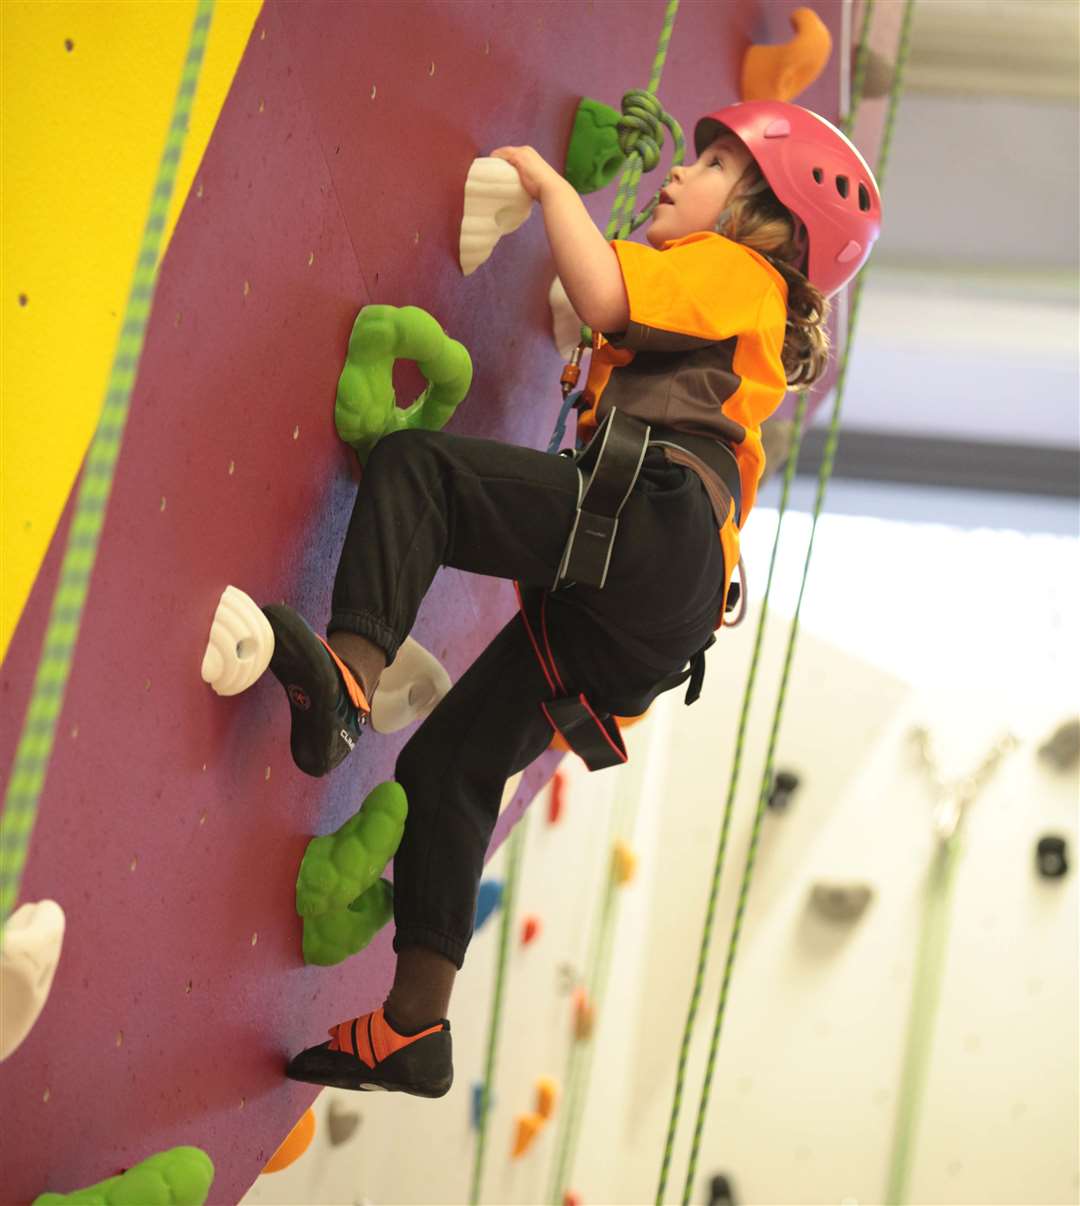 Interior walls are a great place to learn climbing techniques